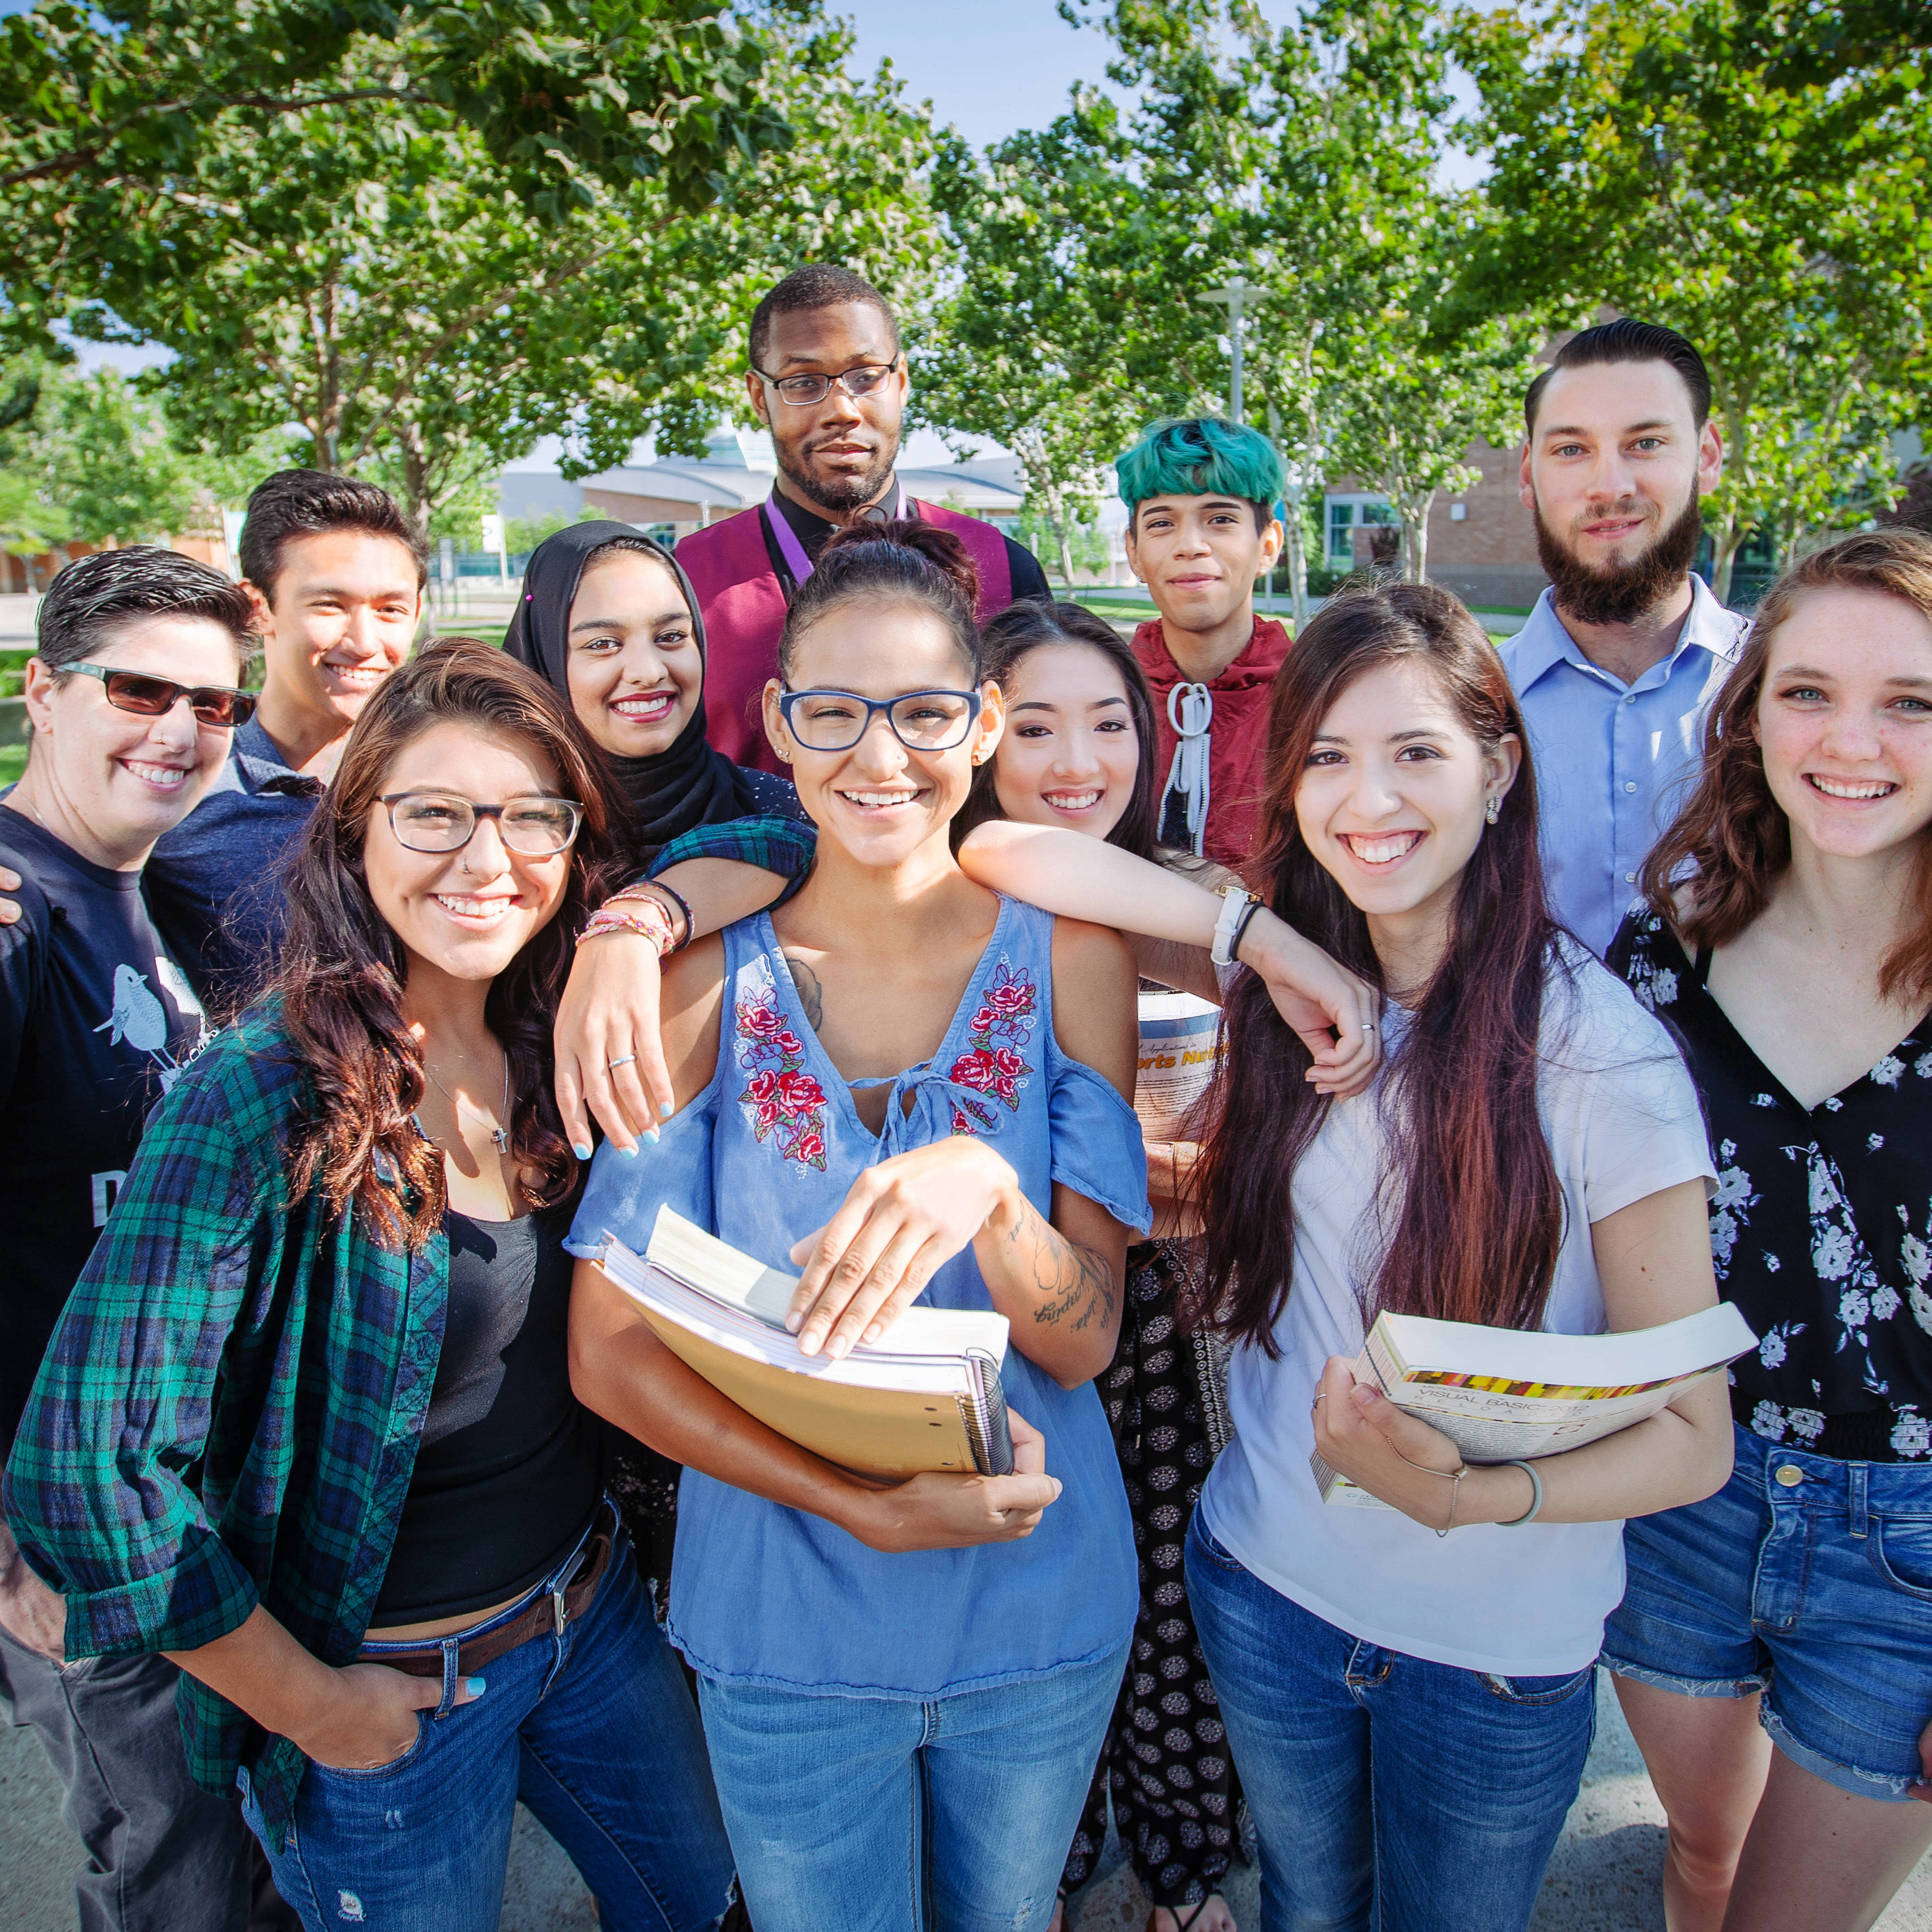 Associated Students of Folsom Lake College